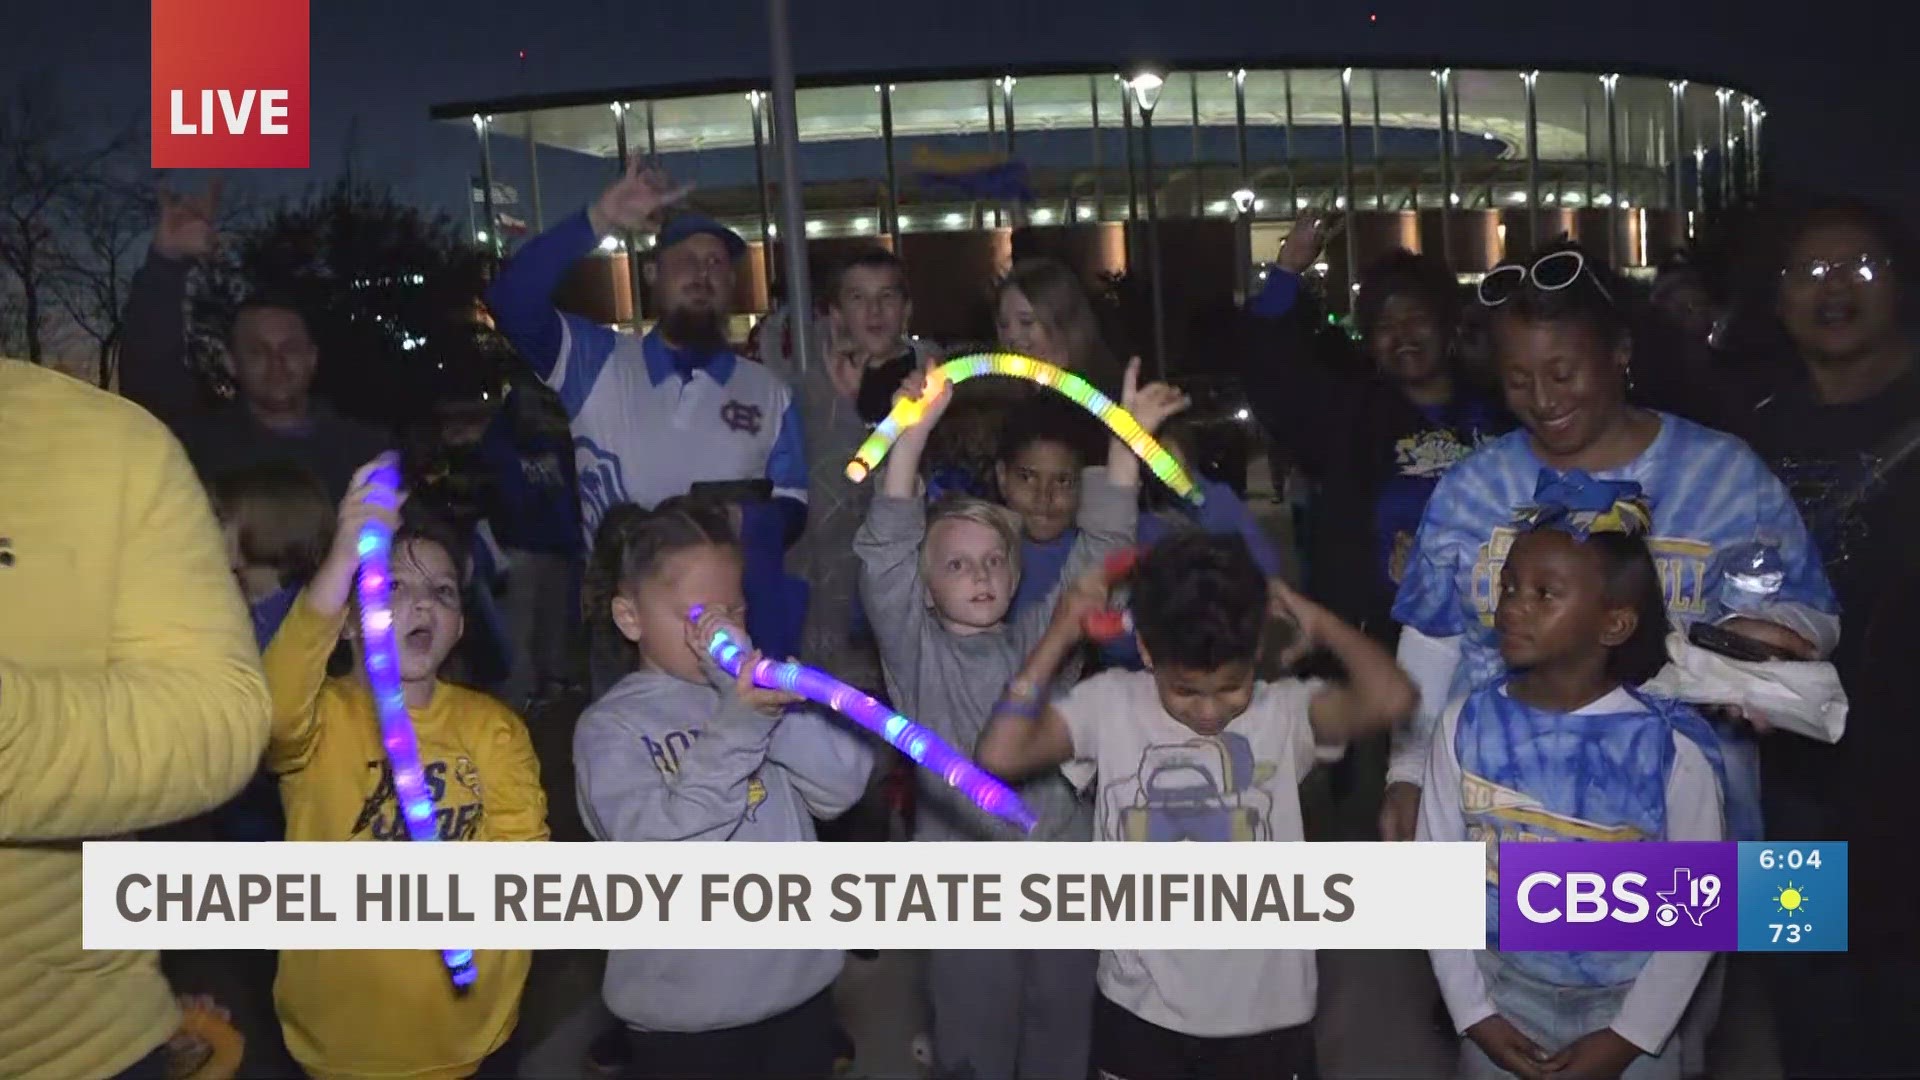 CBS19's Bryce Brauneisen caught up with the Bulldog fans before their big game.